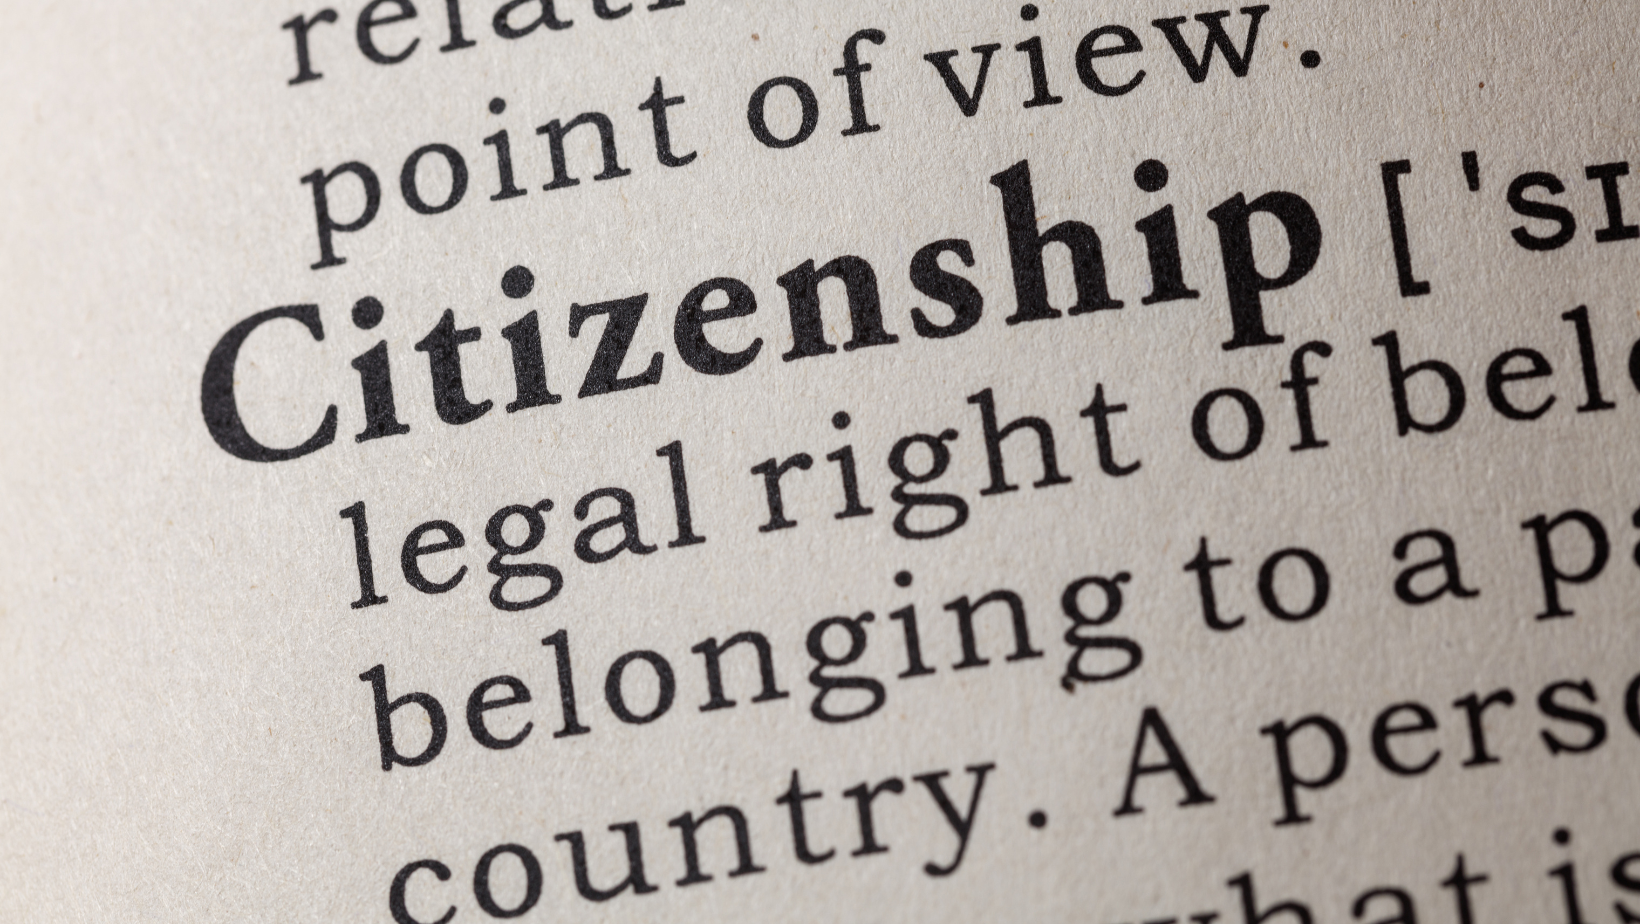 Teaching Citizenship and Global Issues to K-12 Students